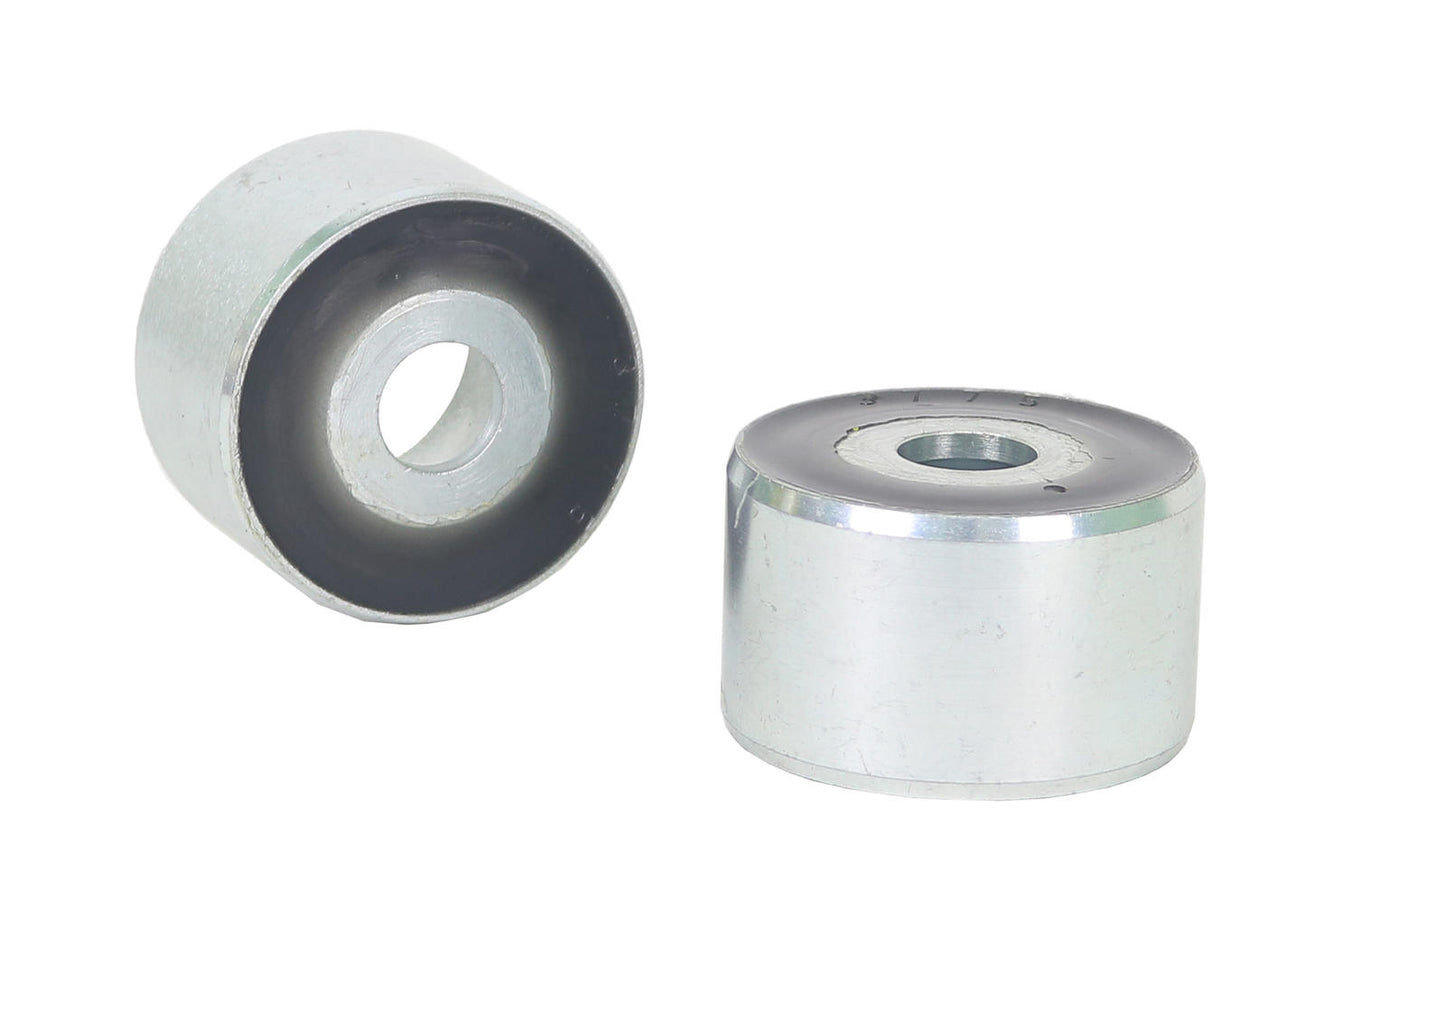 Differential - mount support rear bushing - Nissan